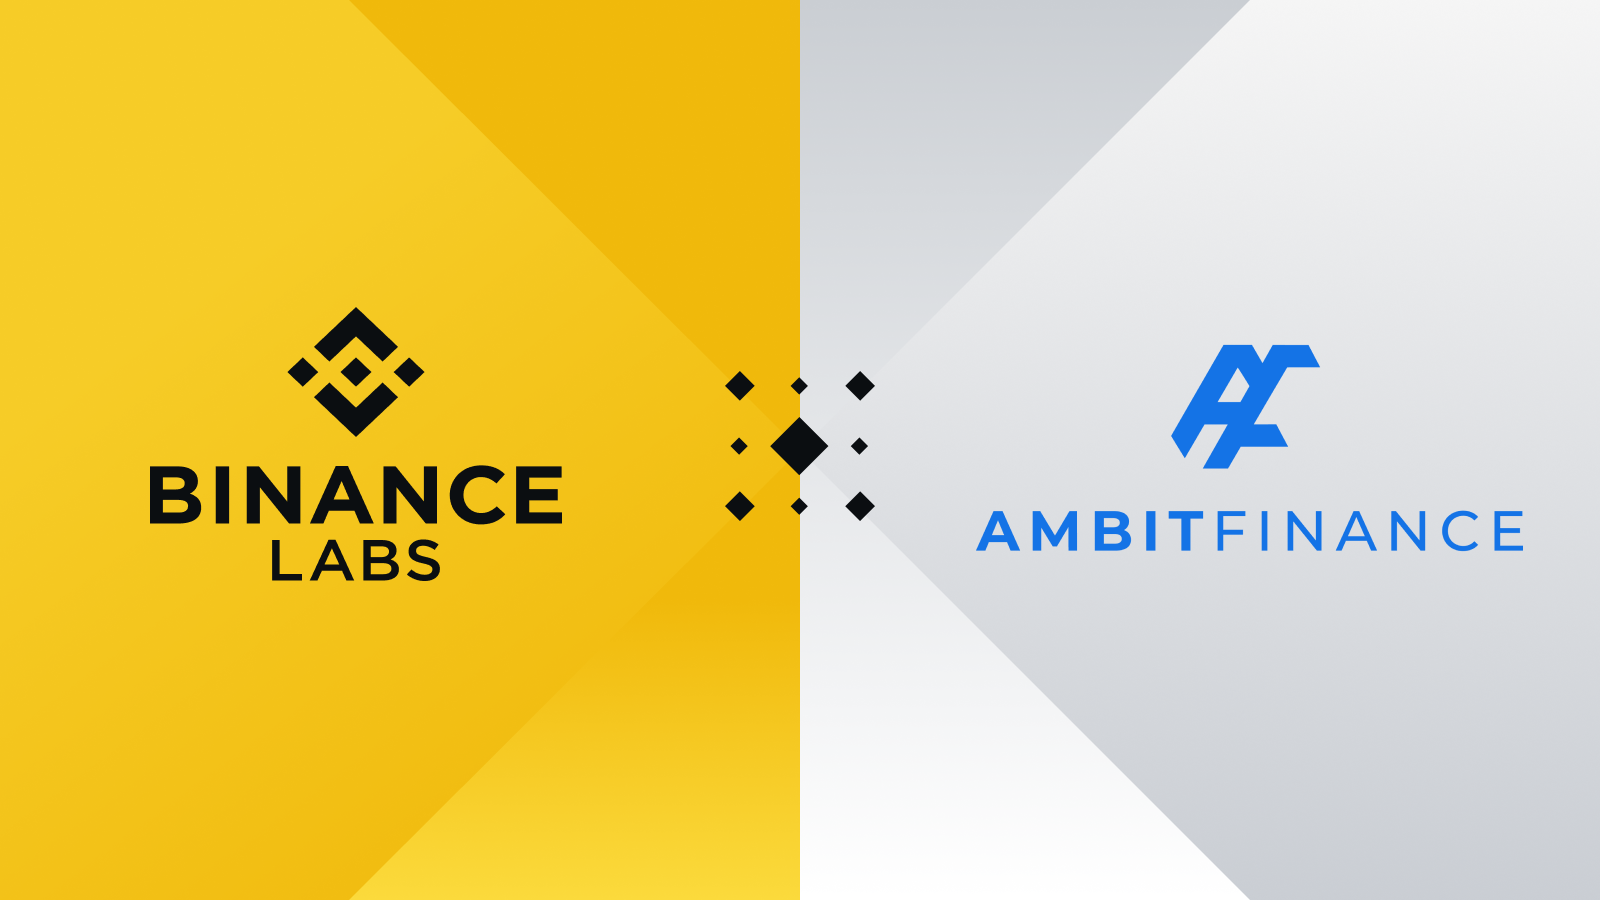 6 projects Binance has partnered with in the last 30 days